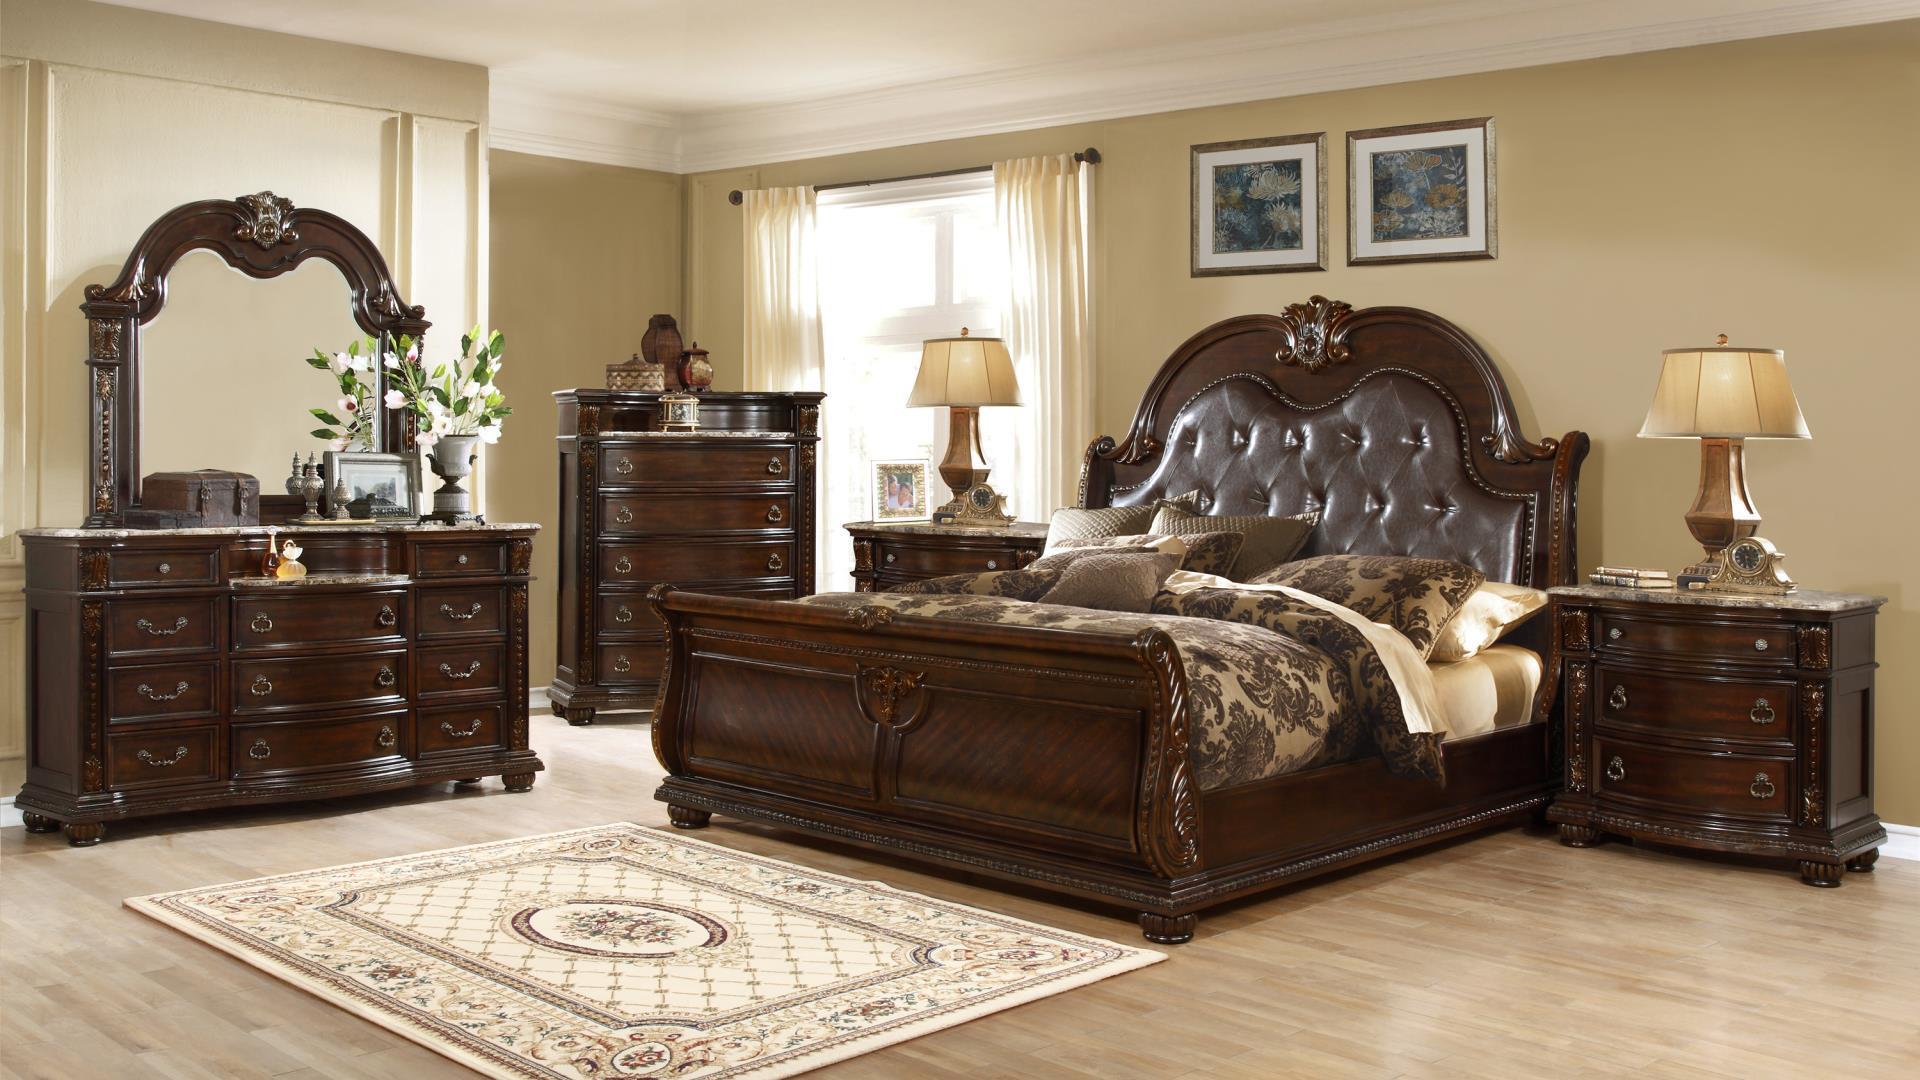 Classic, Traditional Sleigh Bedroom Set ROMA ROMA-Q-Set-4 in Dark Walnut Bonded Leather